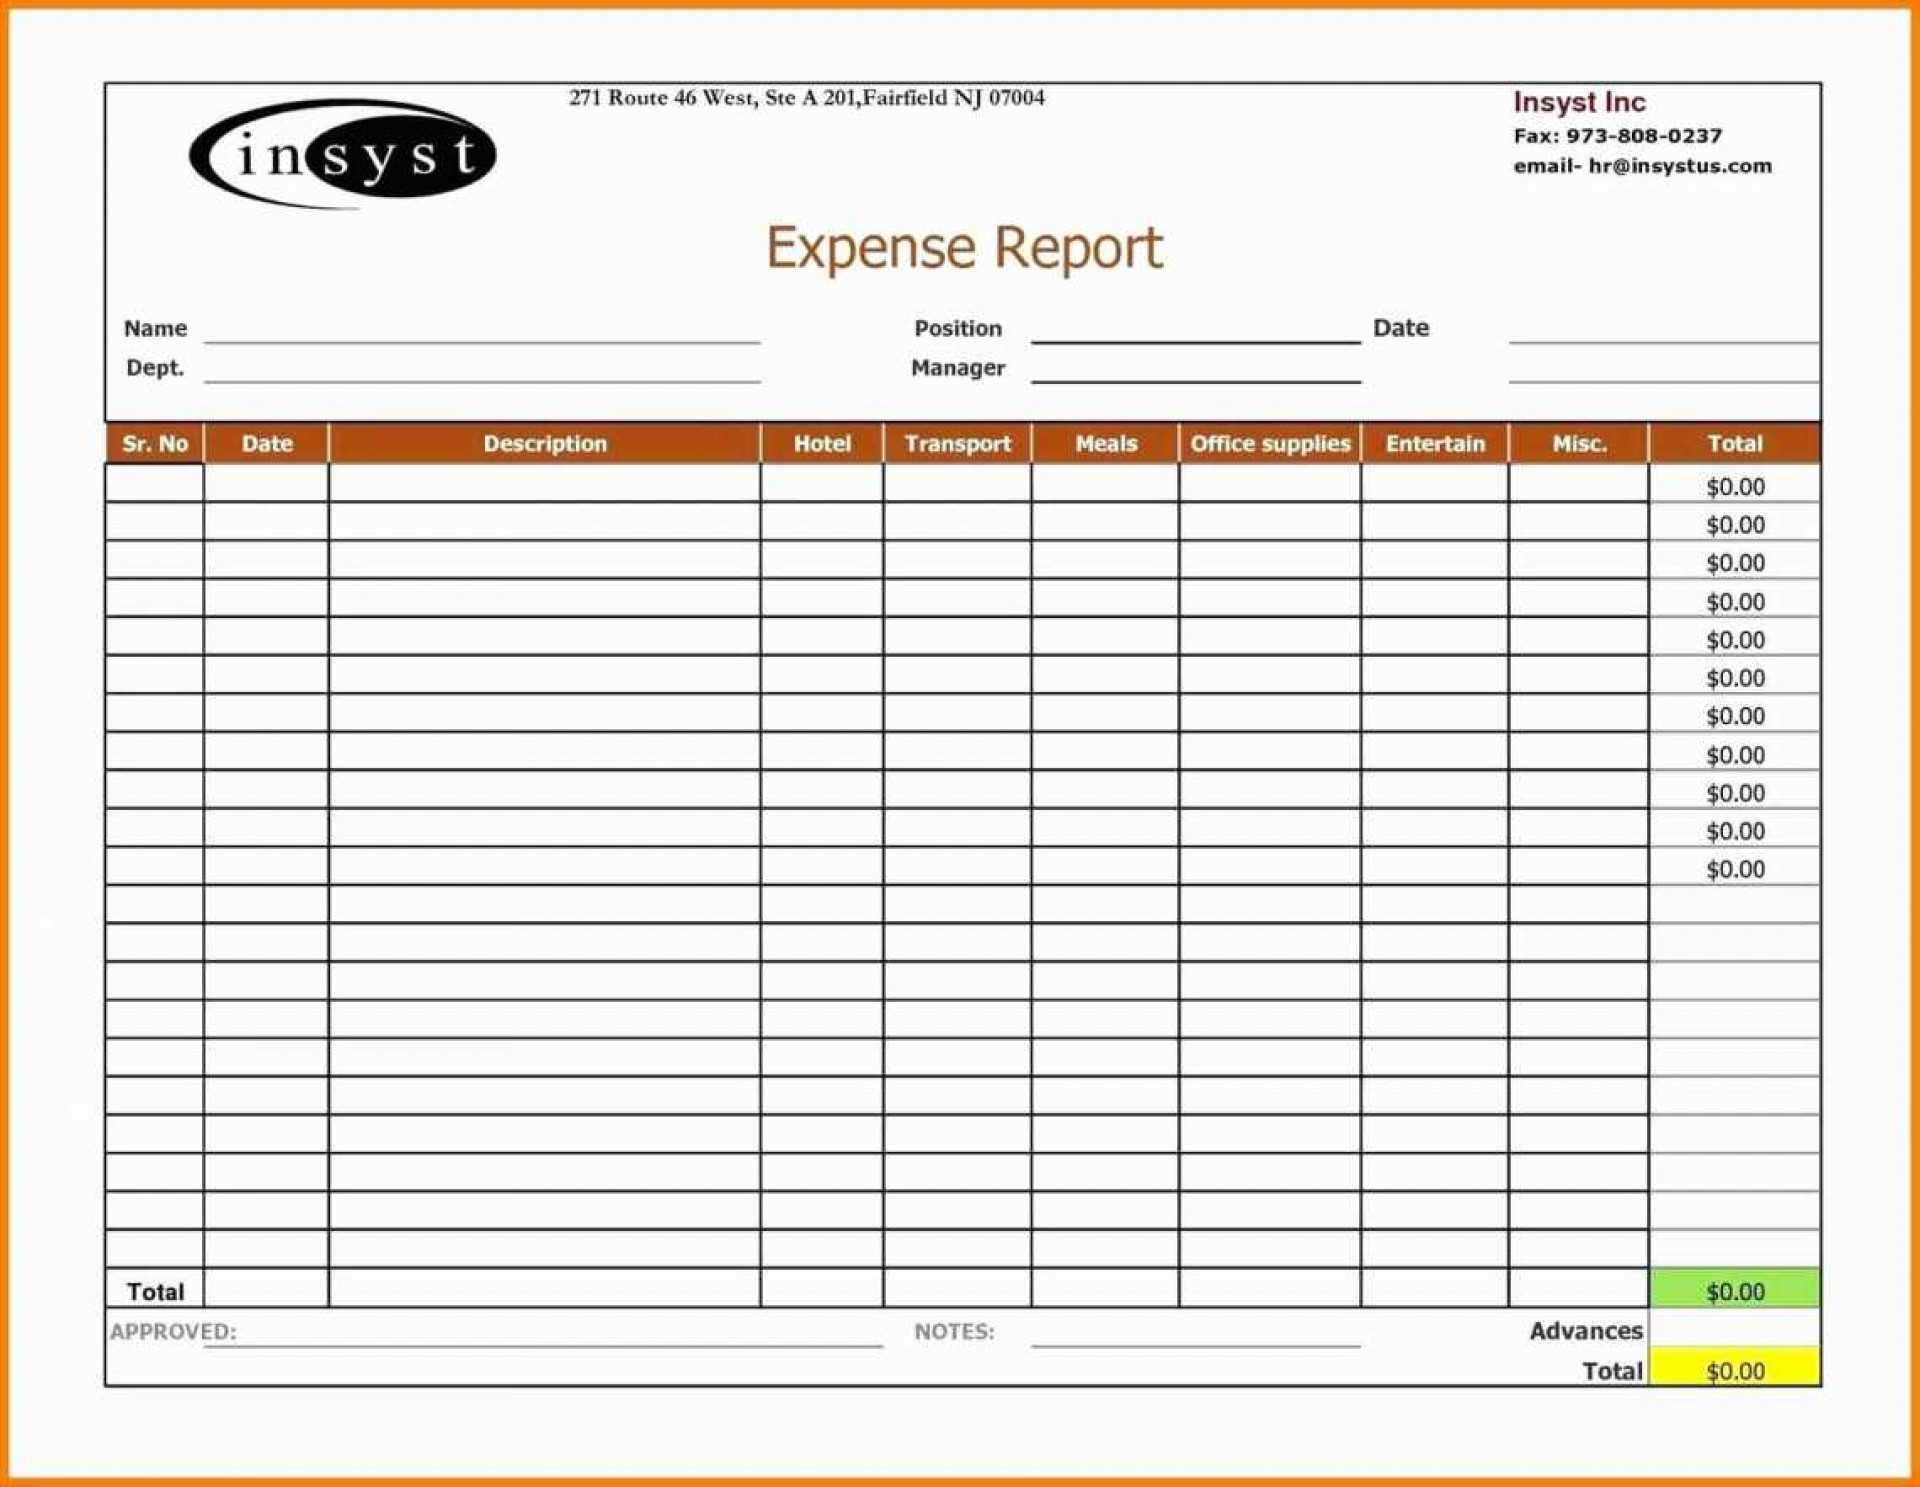 009 Expense Report Format Excel Template Ideas Expenses Pertaining To Expense Report Template Excel 2010